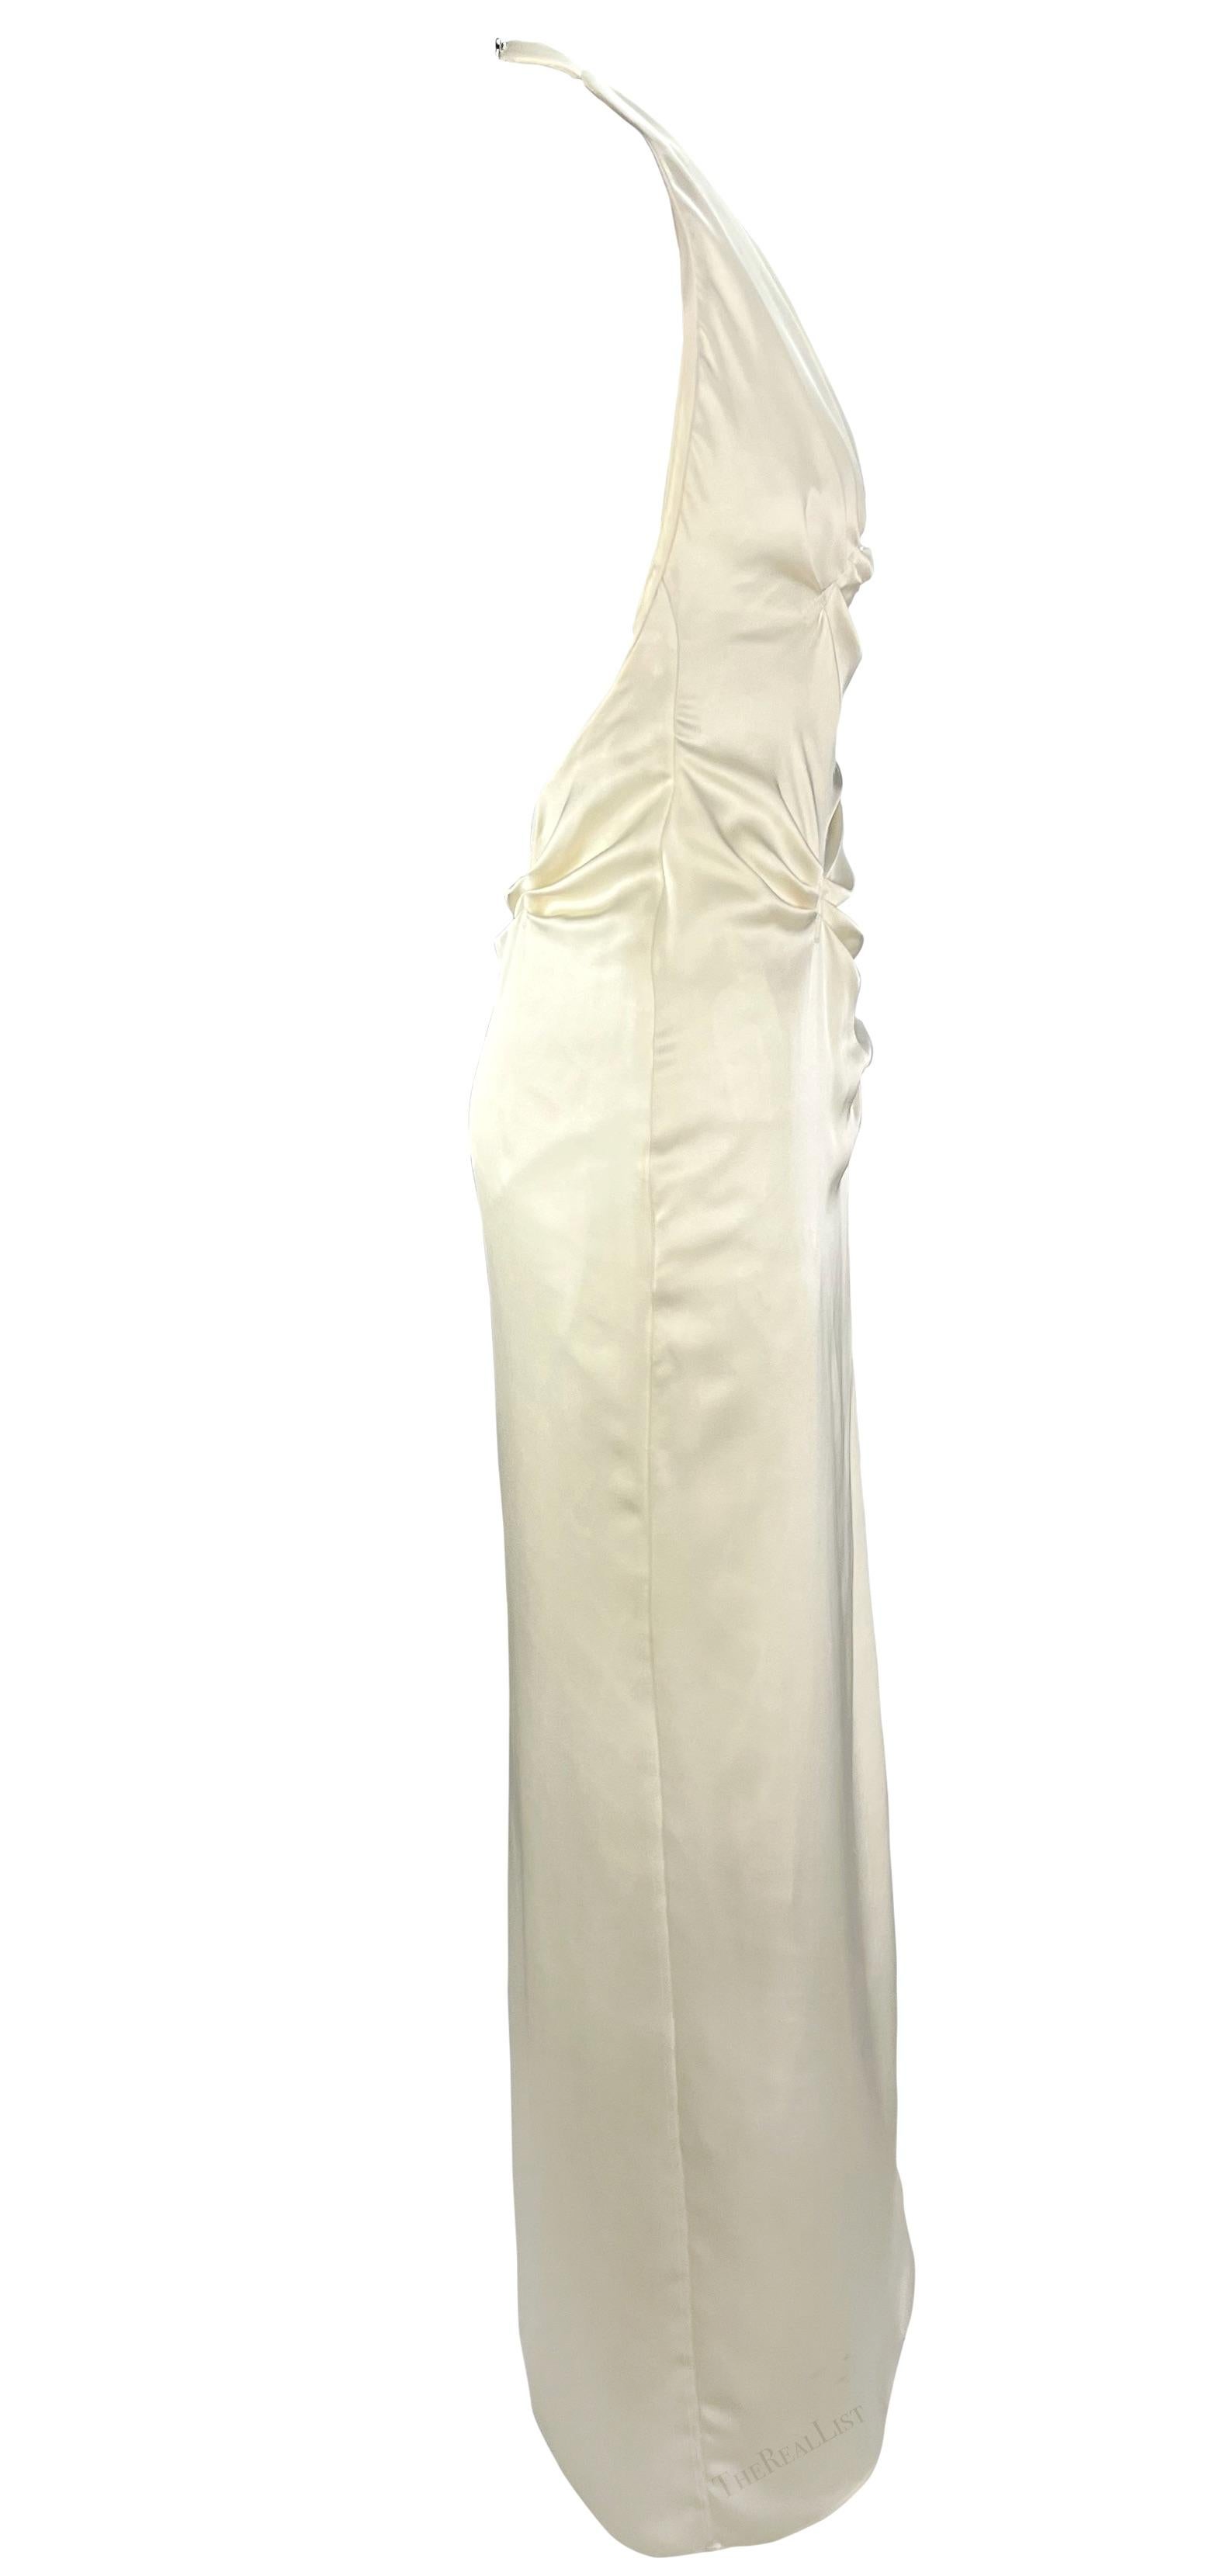 S/S 1999 Gianni Versace by Donatella Ruched Off-White High-Slit Backless Gown 5